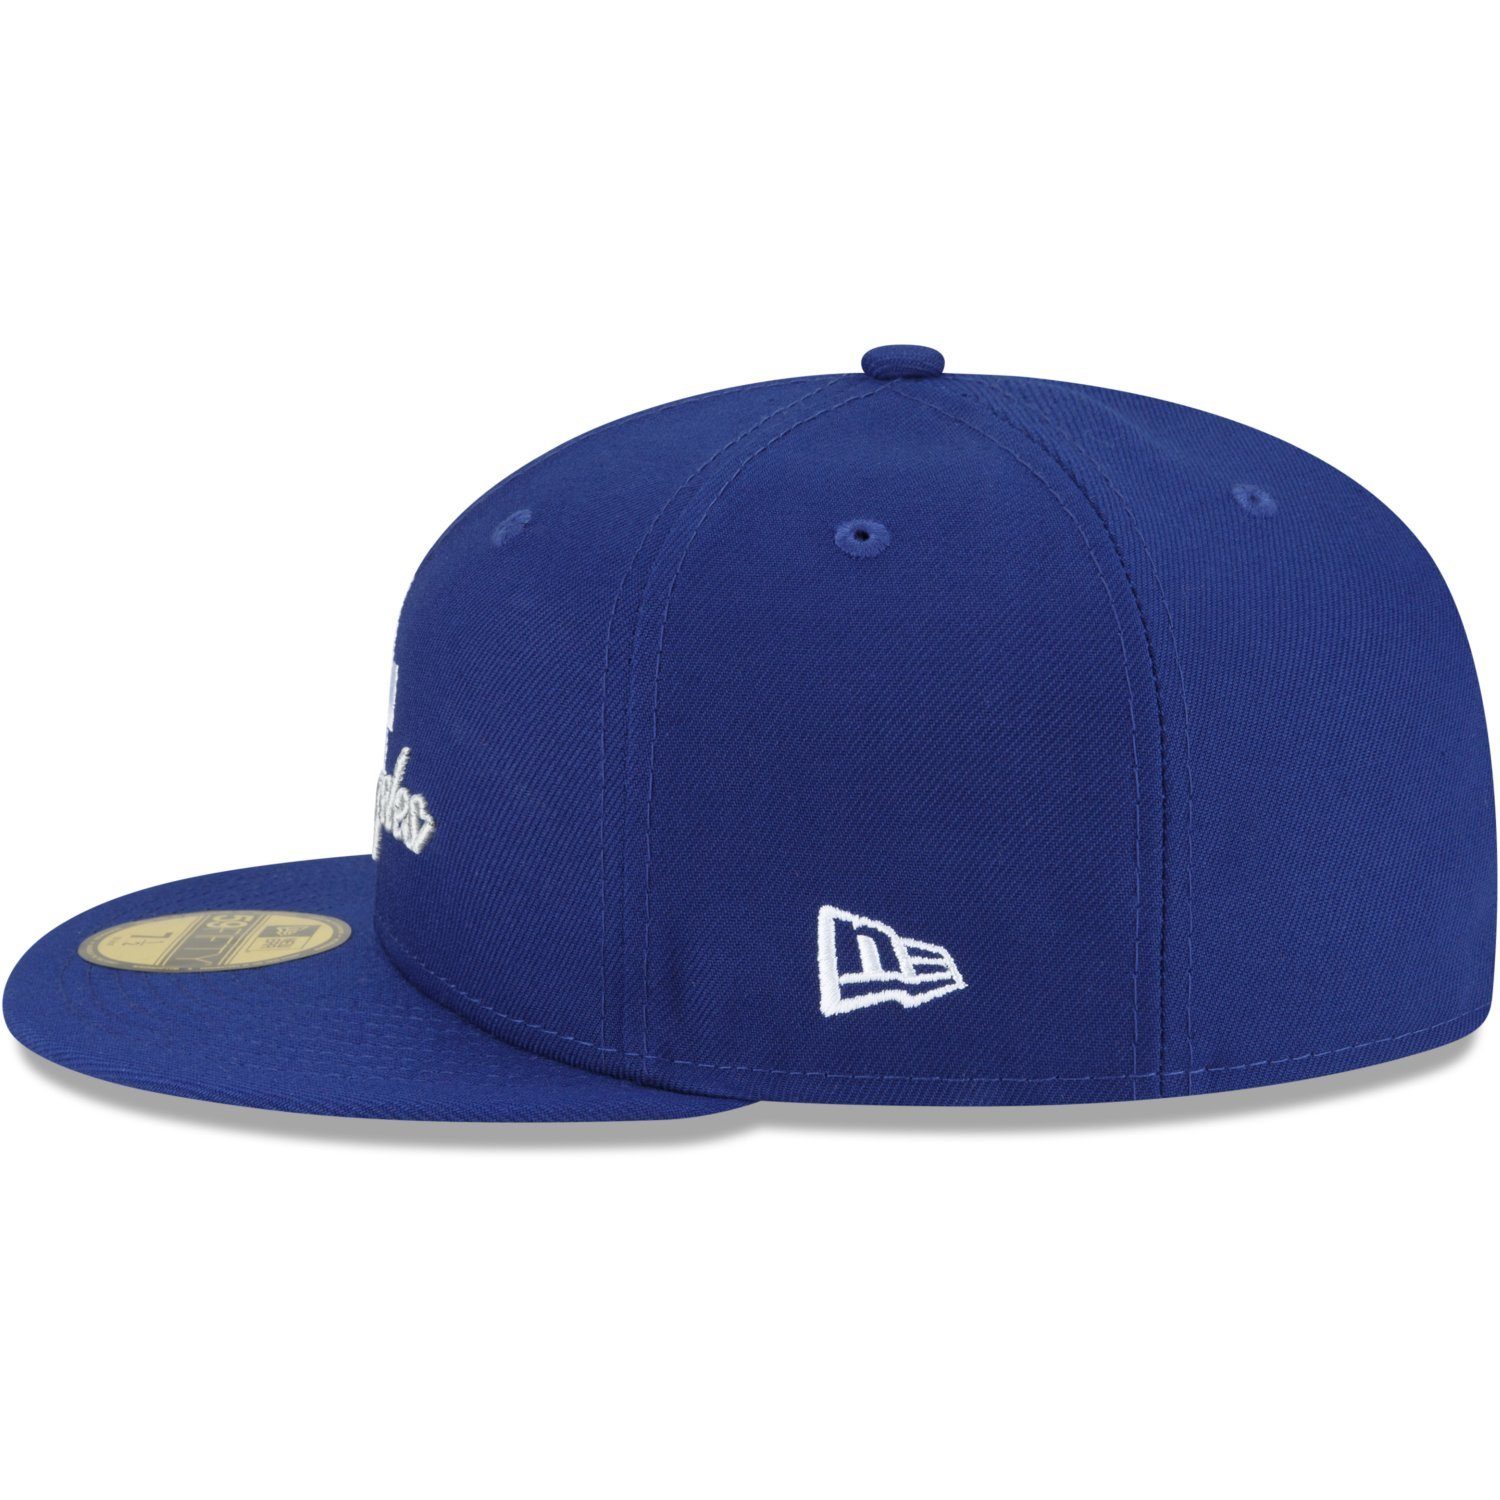 Angeles DUAL Fitted LOGO Los New Dodgers Era 59Fifty Cap